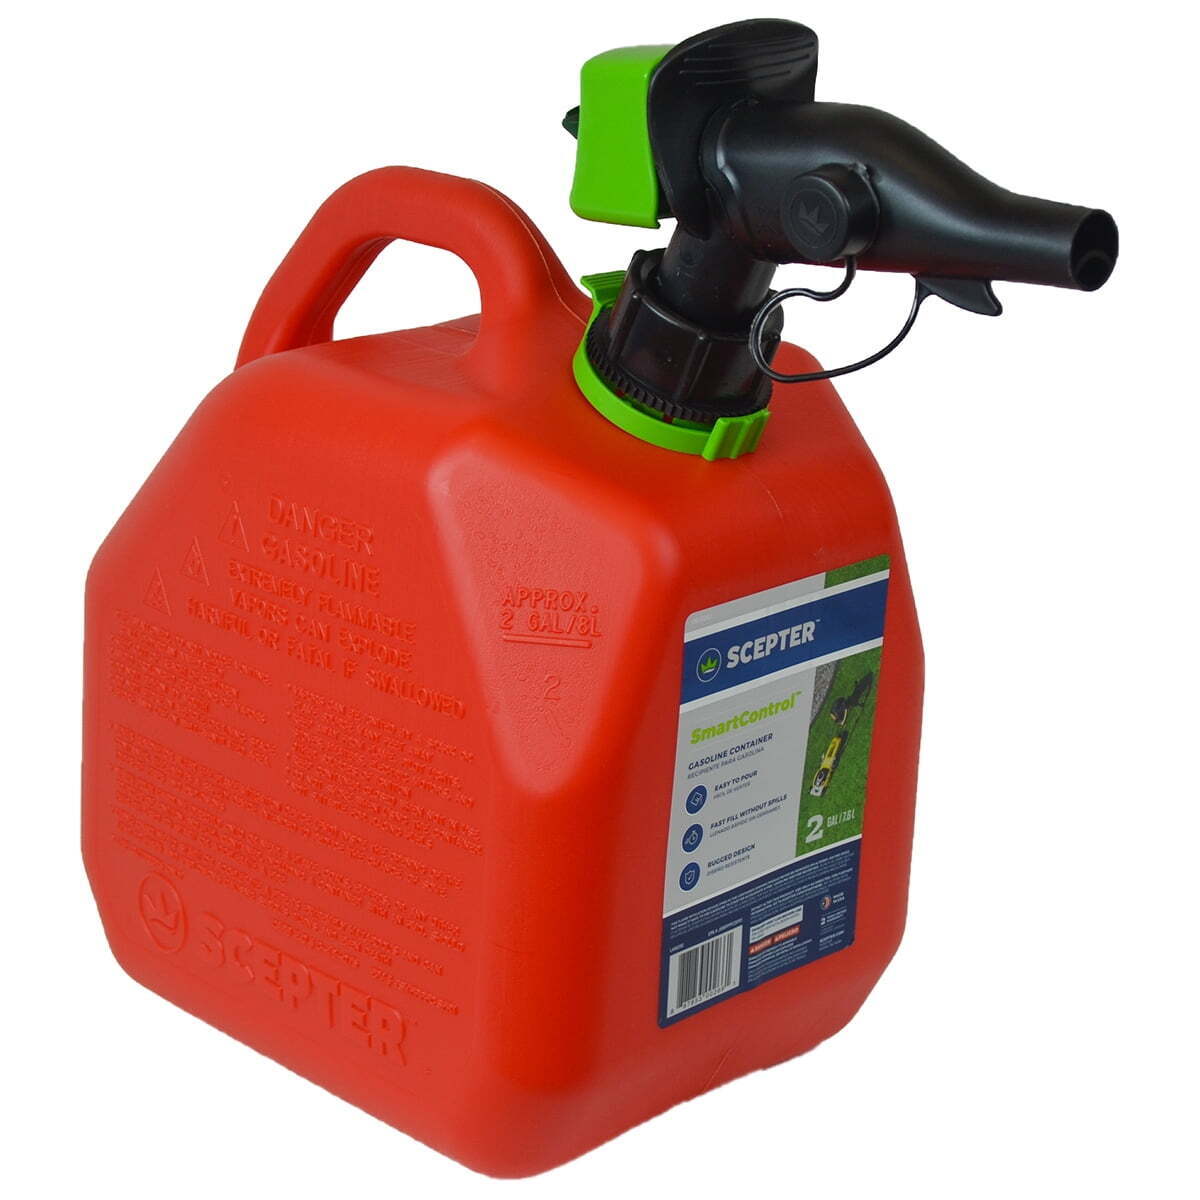 2-Gallon Scepter SmartControl Red Gas Container Height 14\